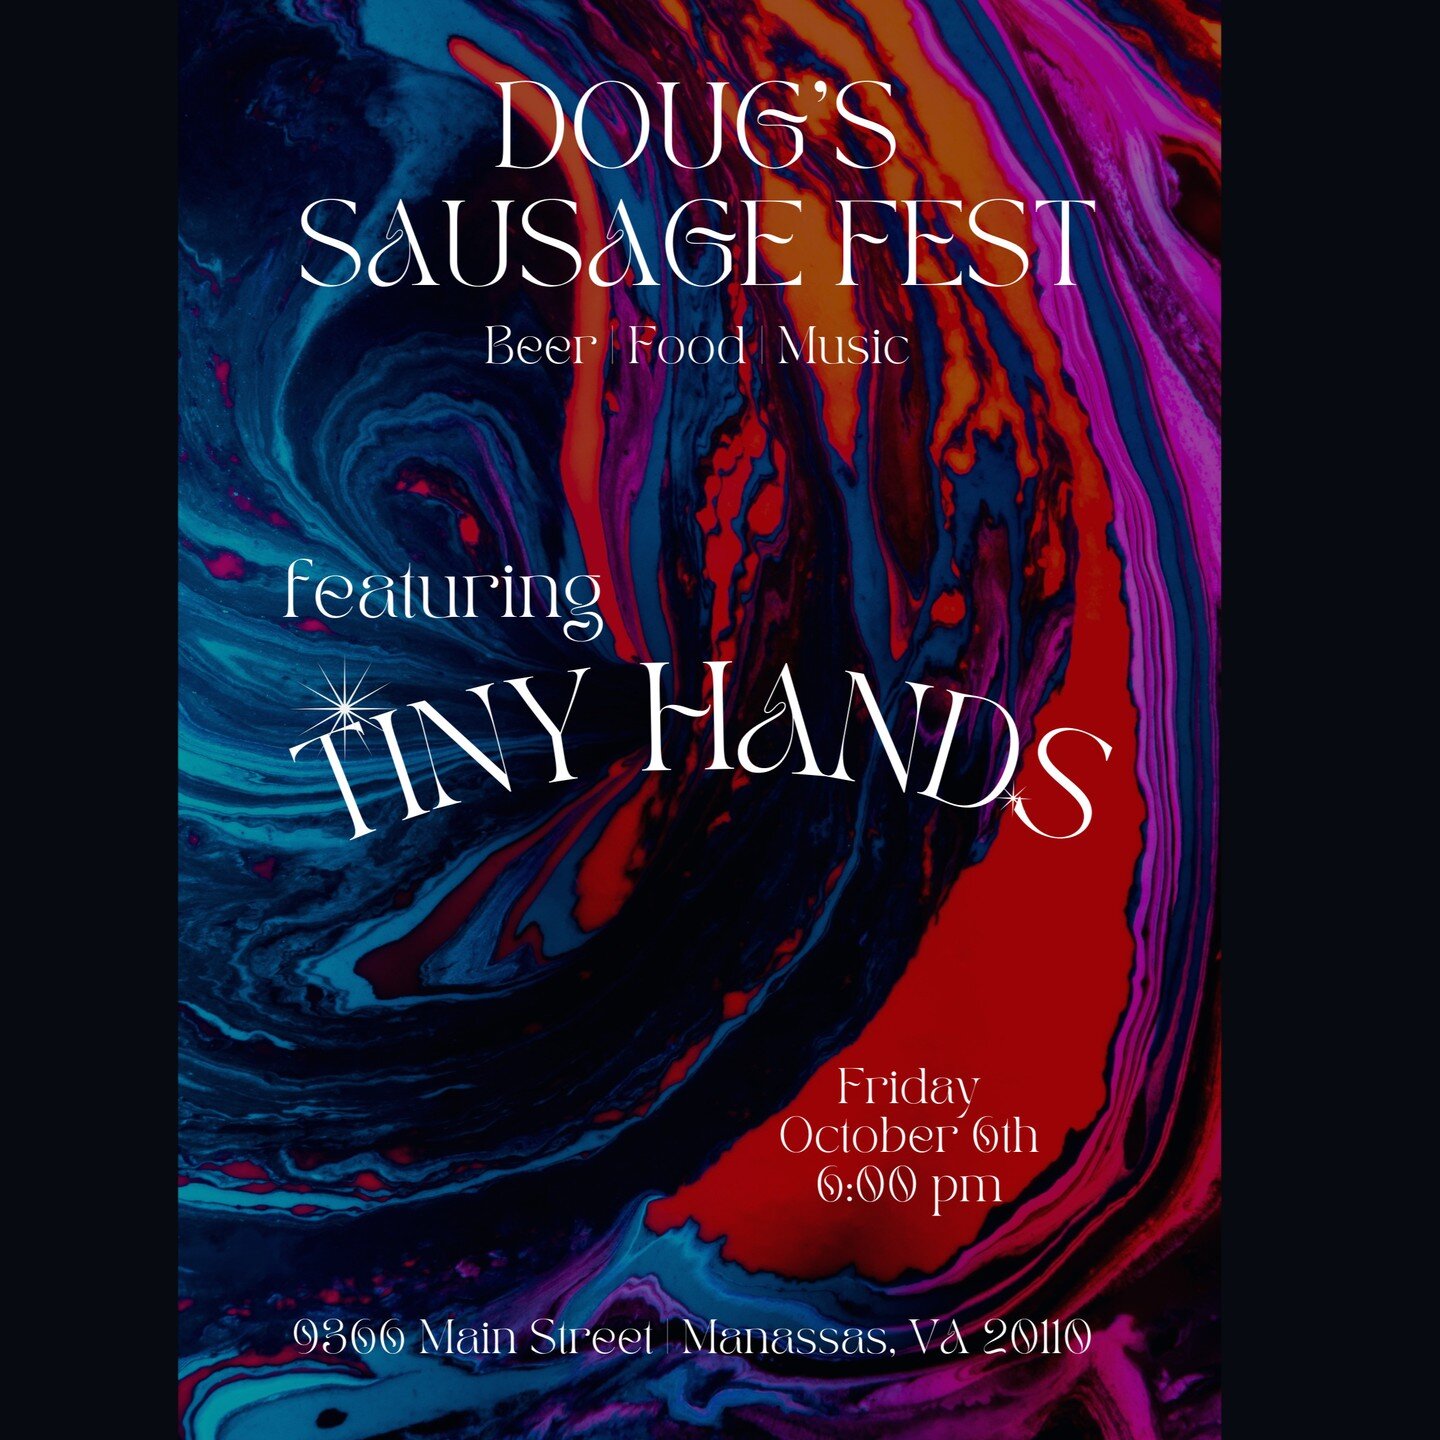 Join us for Doug's Sausage Fest in Historic Downtown Manassas.

We'll be outside grilling up a selection of savory sausages for all to enjoy. 

There will also be activities and entertainment to get you in the spirit of the weekend. See you at Doug's